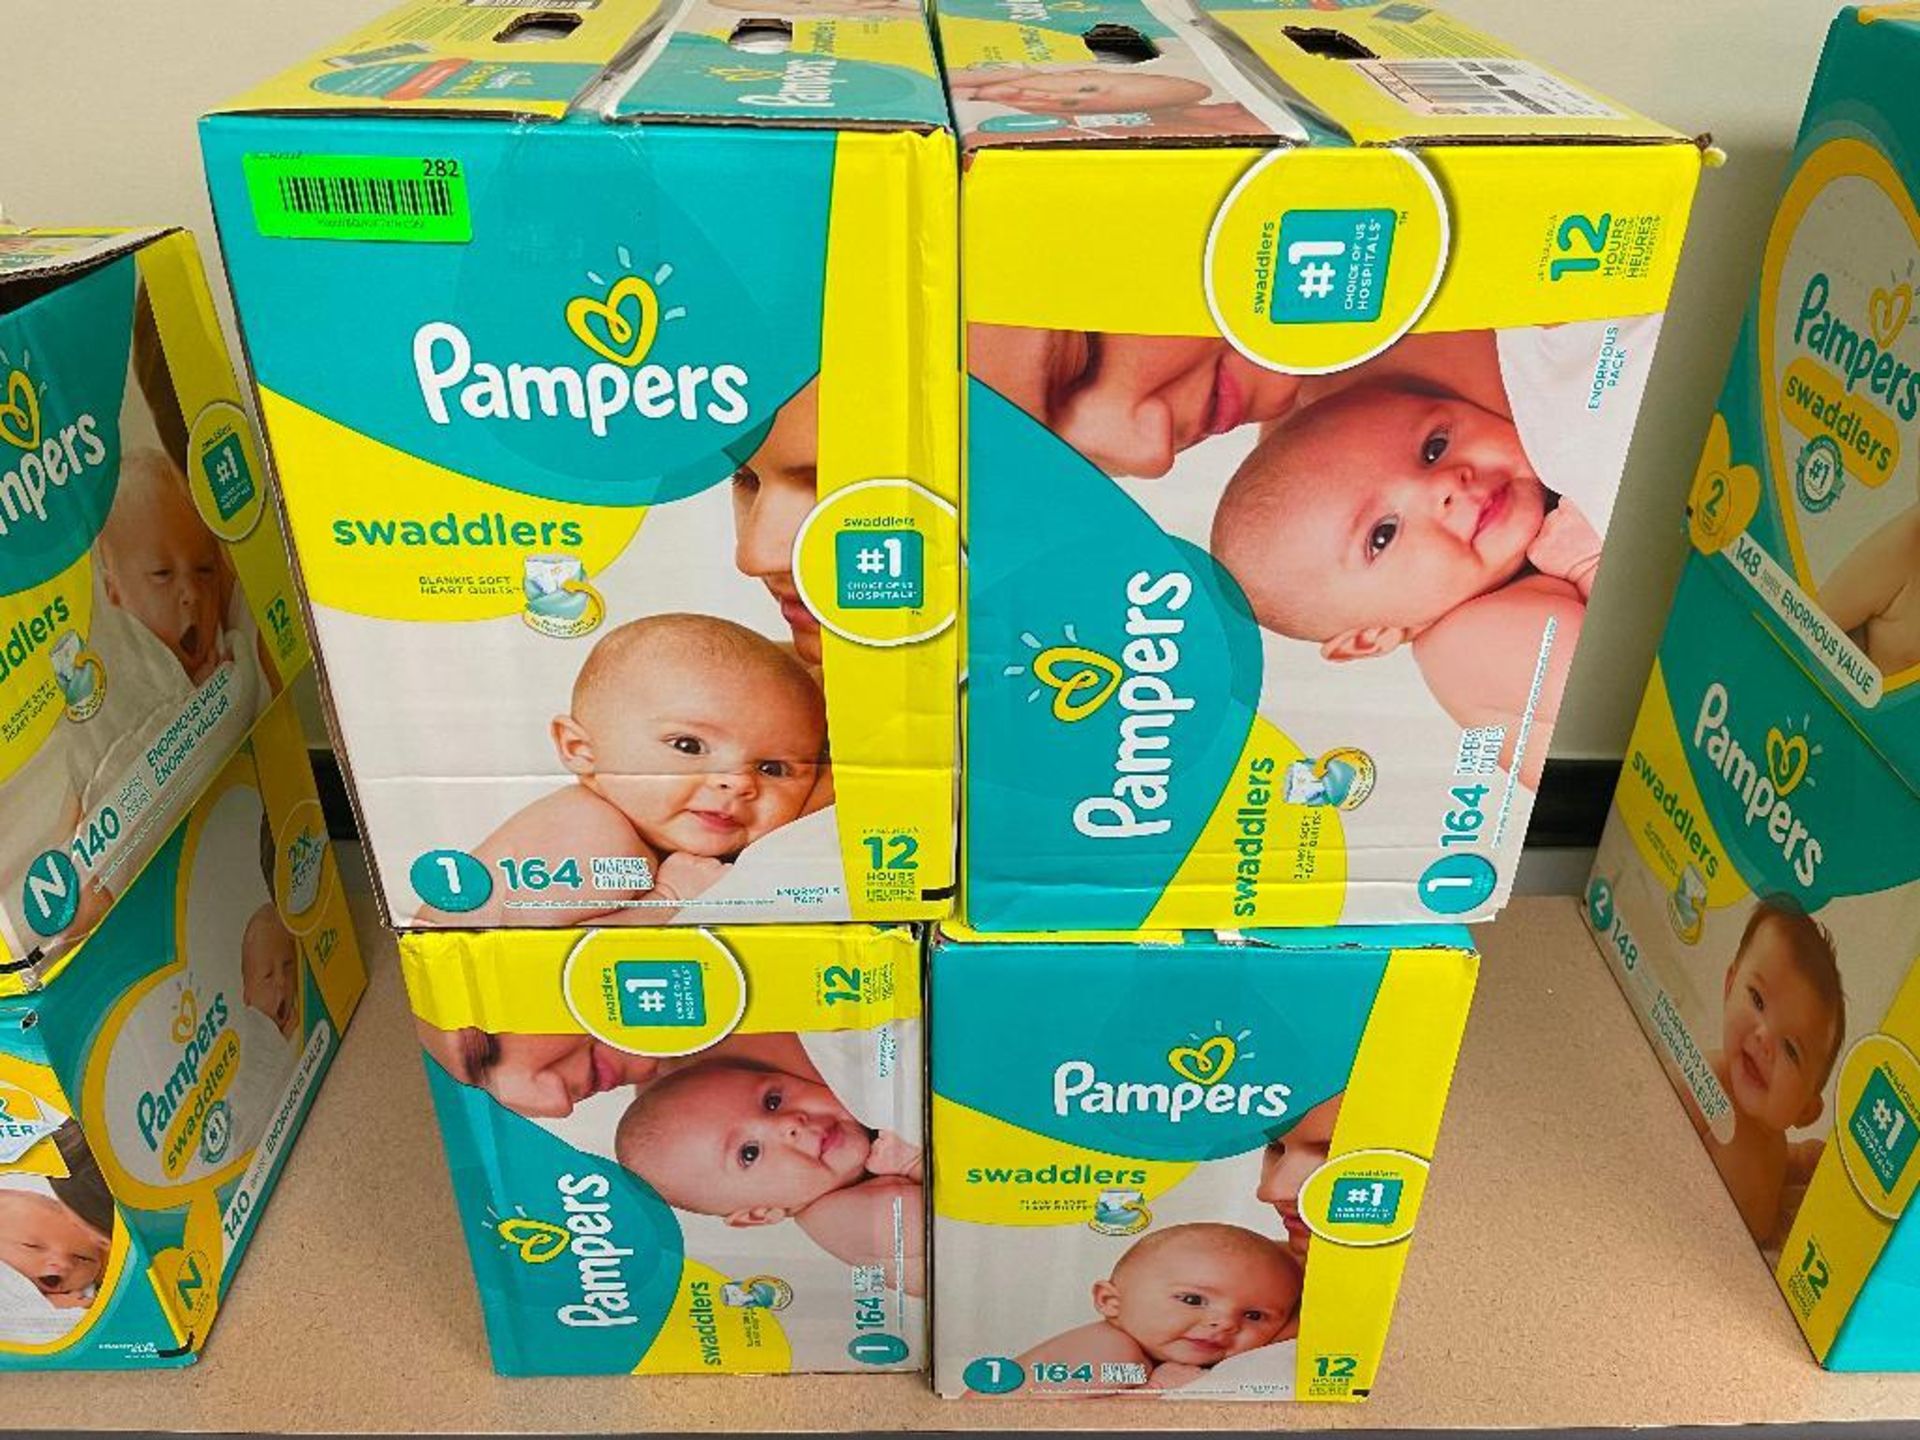 DESCRIPTION: (4) BOXES OF PAMPERS SWADDLERS SIZE 1 LOCATION: BASEMENT CONFERENCE ROOM QTY: 4